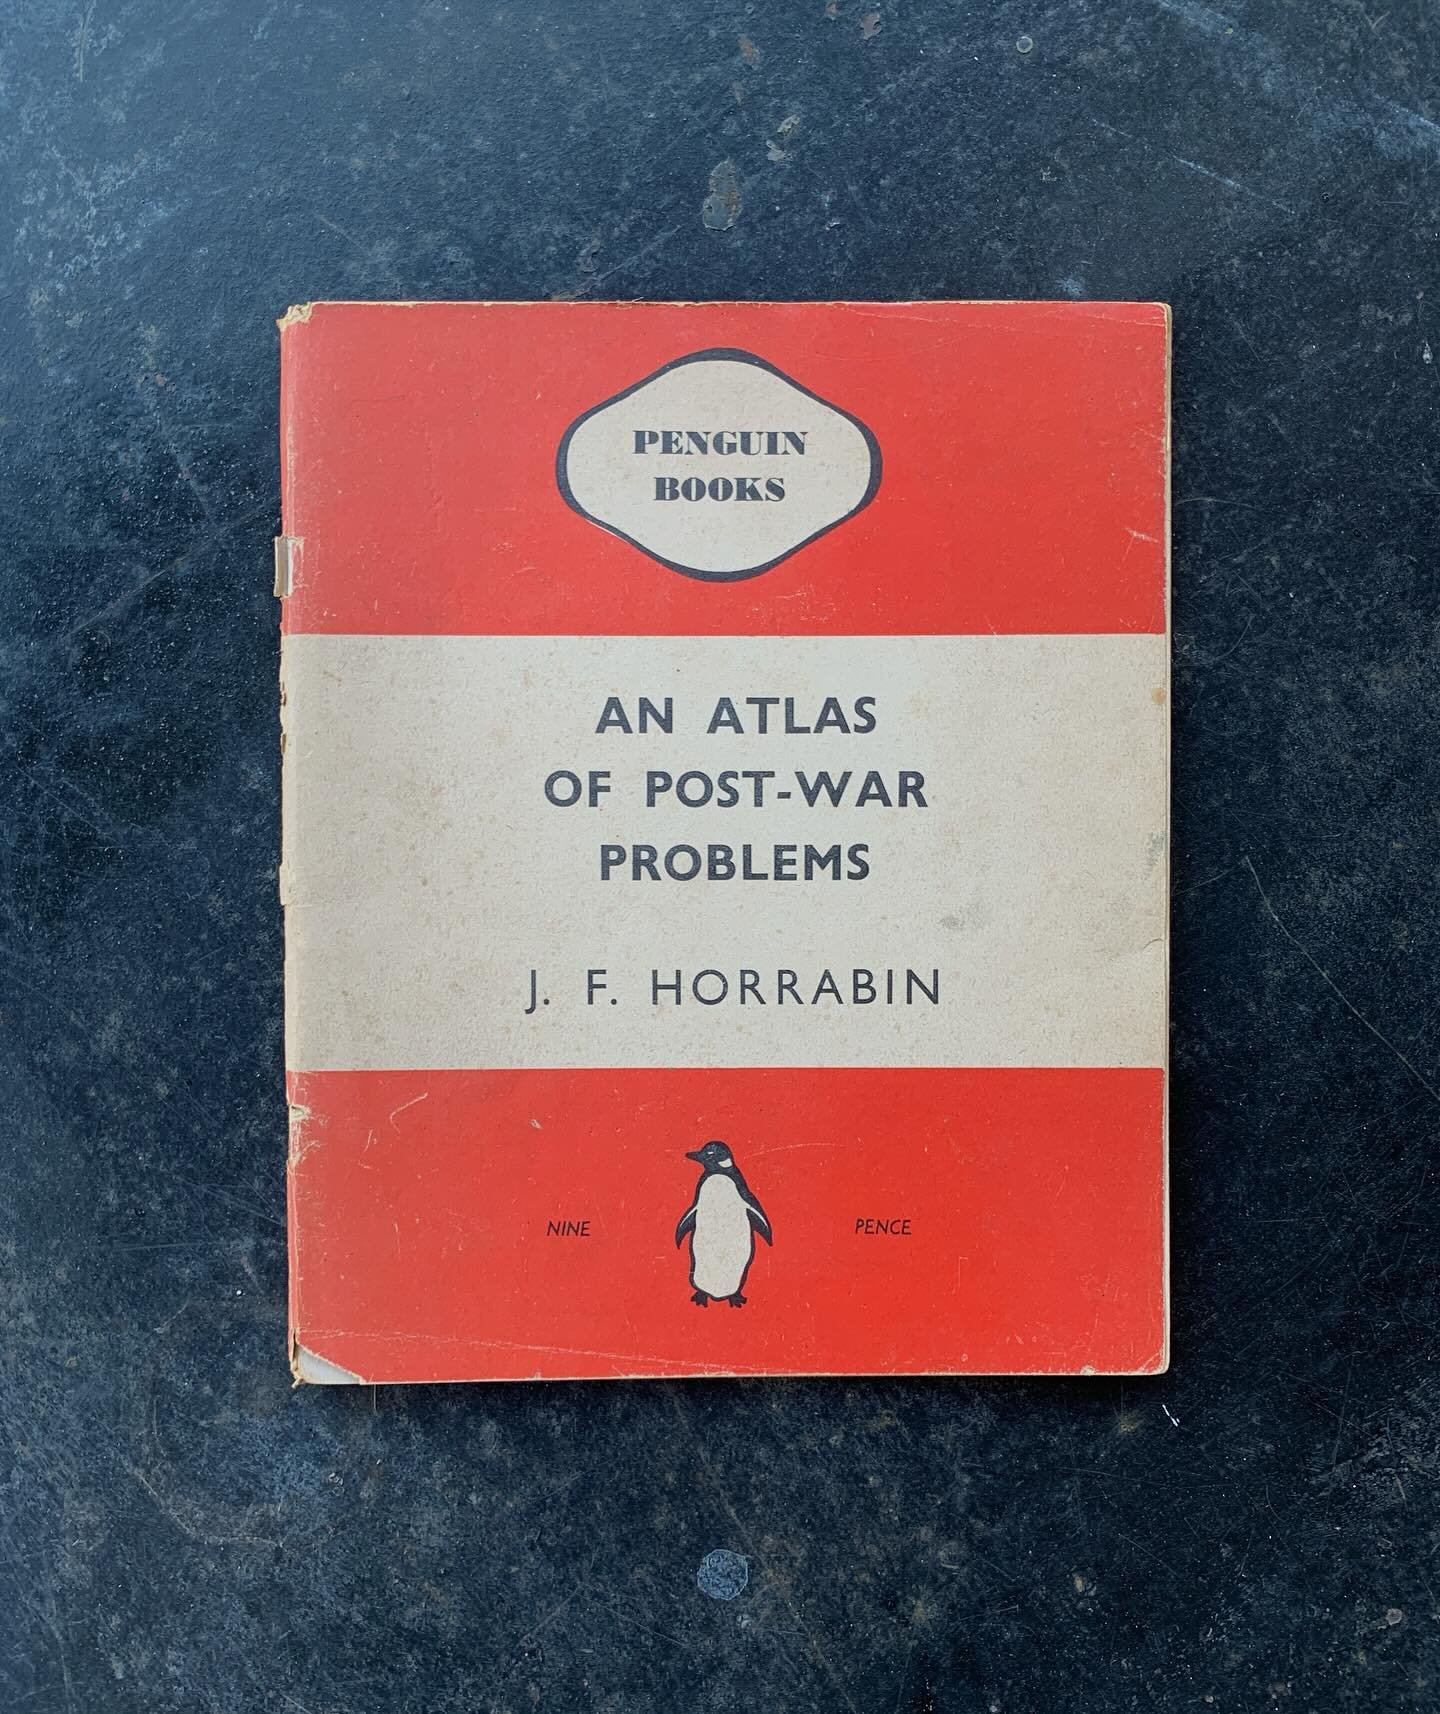 Yet another Penguin Special (bought a tin box full of them). Available at the shop tomorrow.
#penguinbooks 
#penguinclassics 
 #vintagebooks 
#atlas
#wartime
#ww2